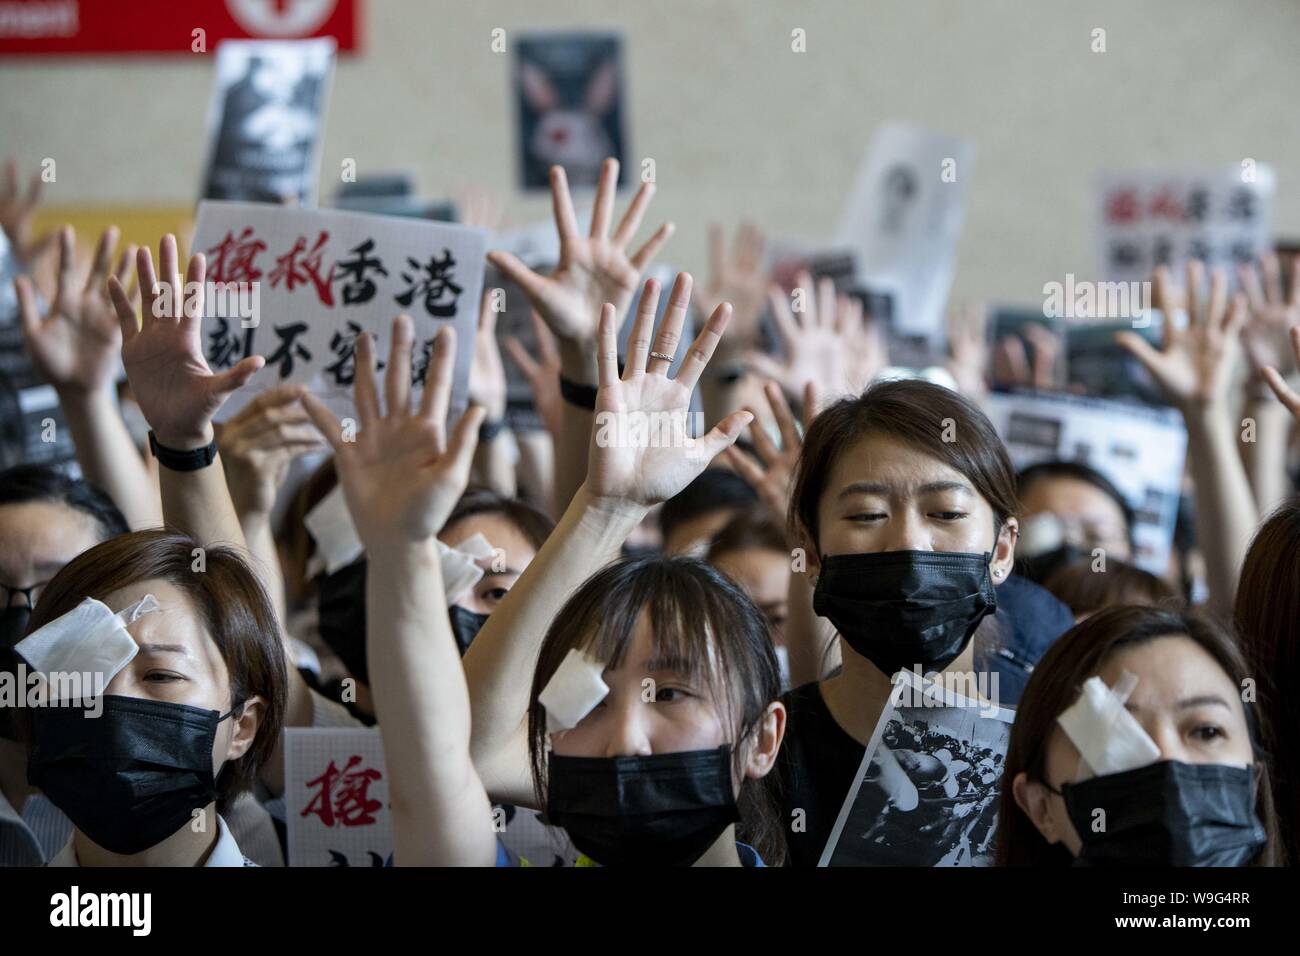 Sha Tin, Hong Kong, China. 13th Aug, 2019. Hospital staff and protesters participate in a peaceful sit in demonstration in the lobby of the Prince of Wales Hospital in Sha Tin, Hong Kong to express their opposition to violent tactics employed by Hong Kong Police. Pro-democracy demonstrators in Hong Kong have added eye patches to their unofficial uniform of black T-shirts, hard hats and gas masks, after a protester was reportedly hit by a bean bag round and blinded. Credit: Adryel Talamantes/ZUMA Wire/Alamy Live News Stock Photo